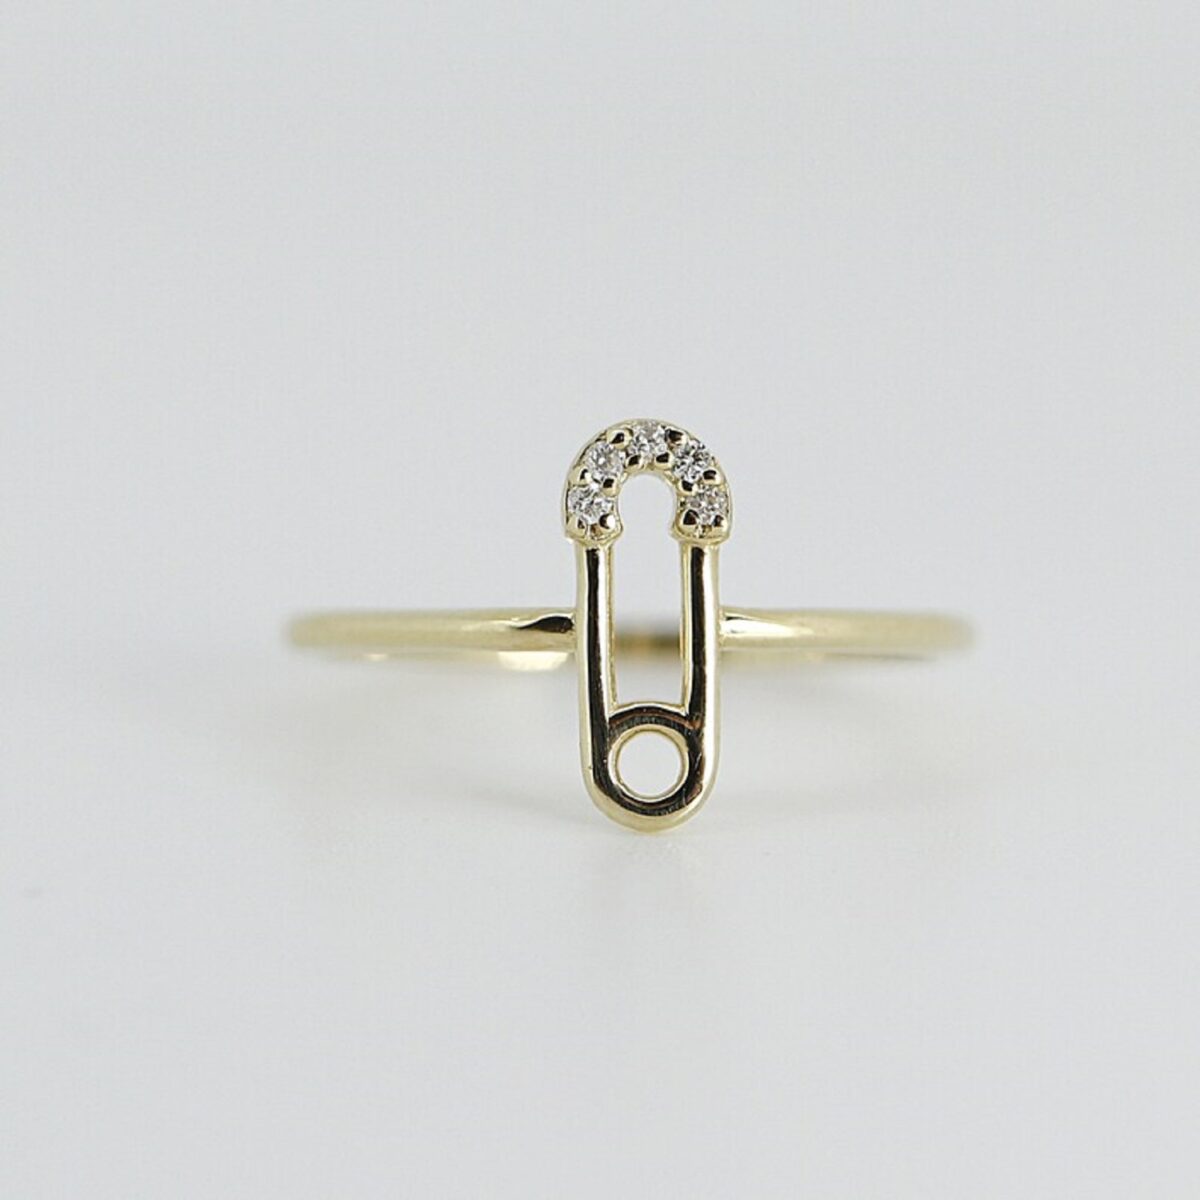 Unique, modern, minimal, safety pin shaped round cut lab grown diamond ring crafted in 14k solid yellow gold